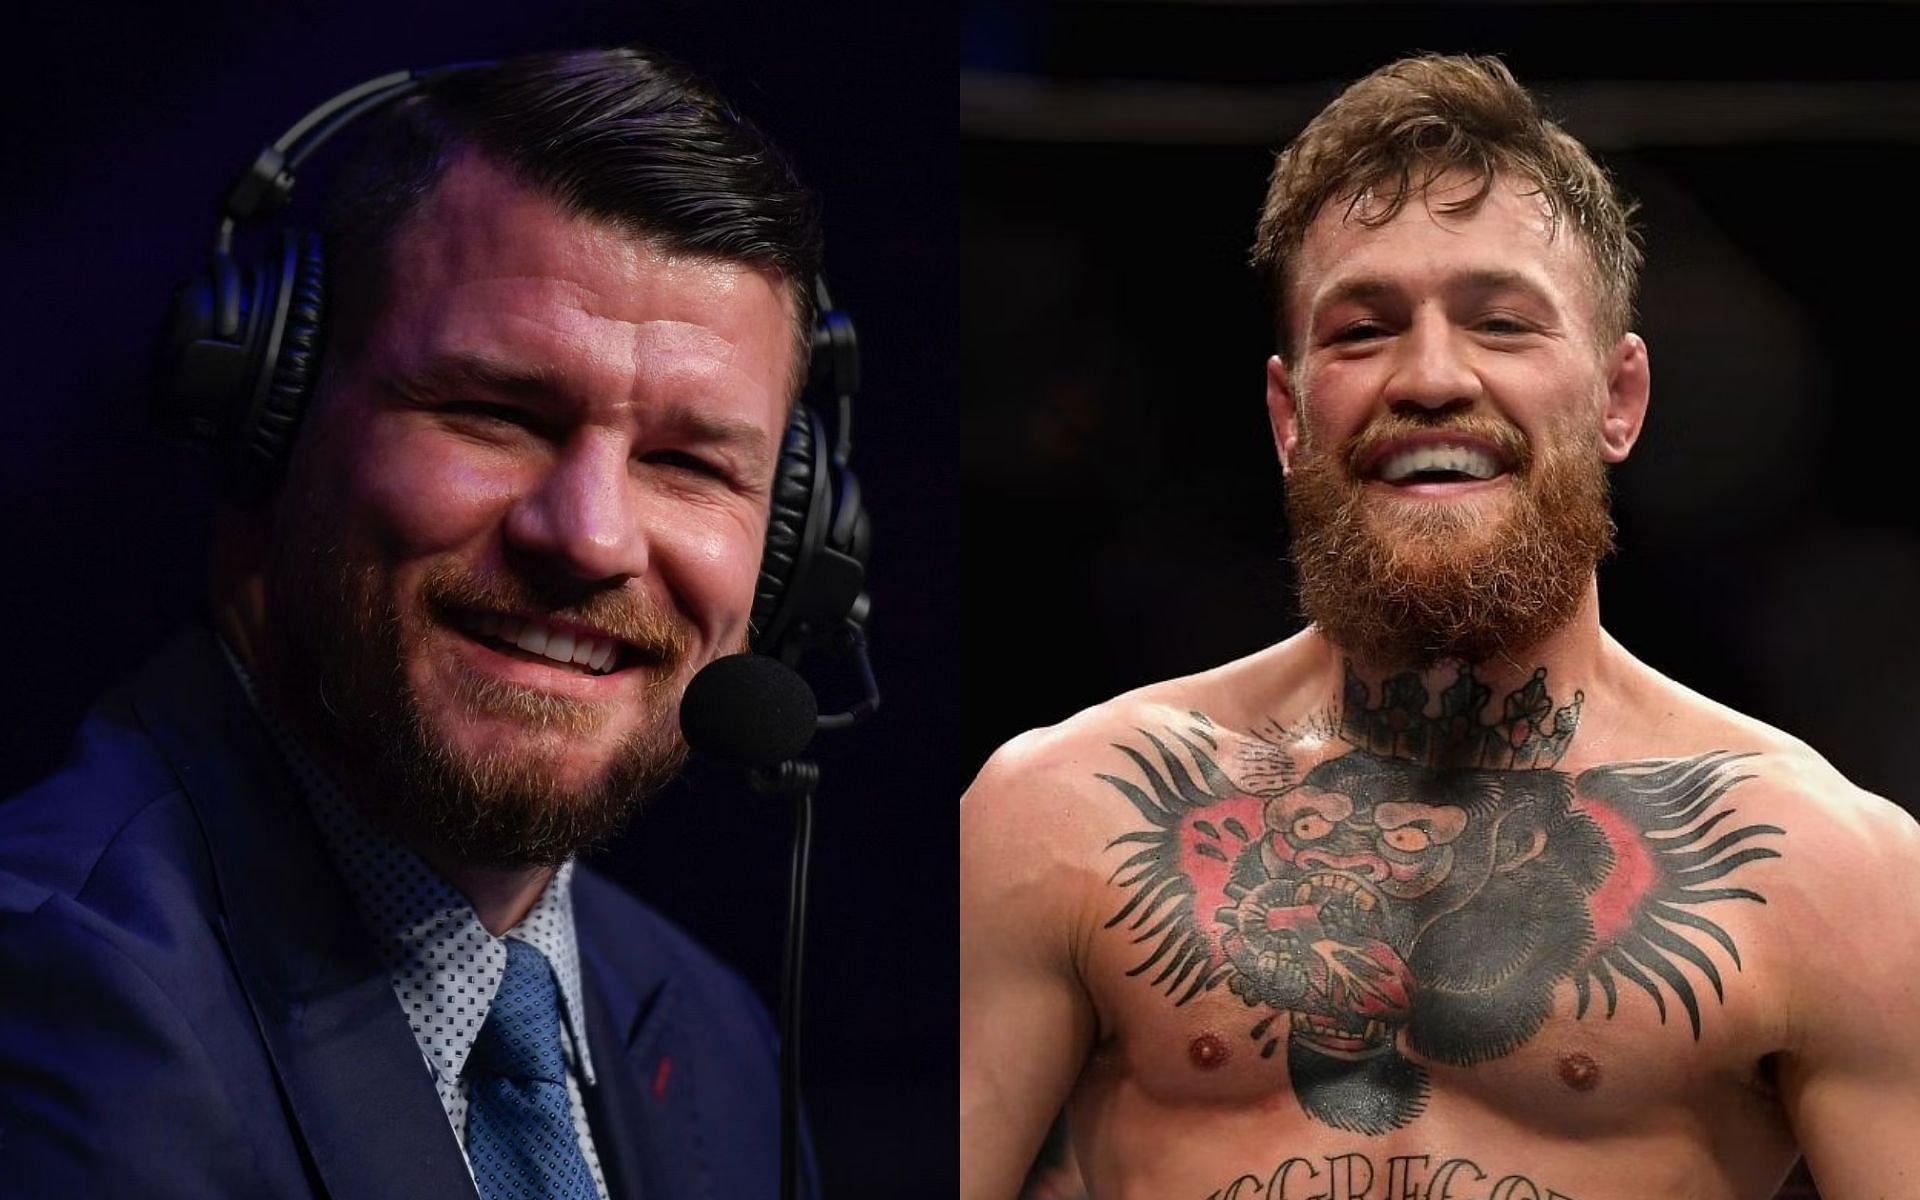 Michael Bisping shares ideal TUF opponent for Conor McGregor